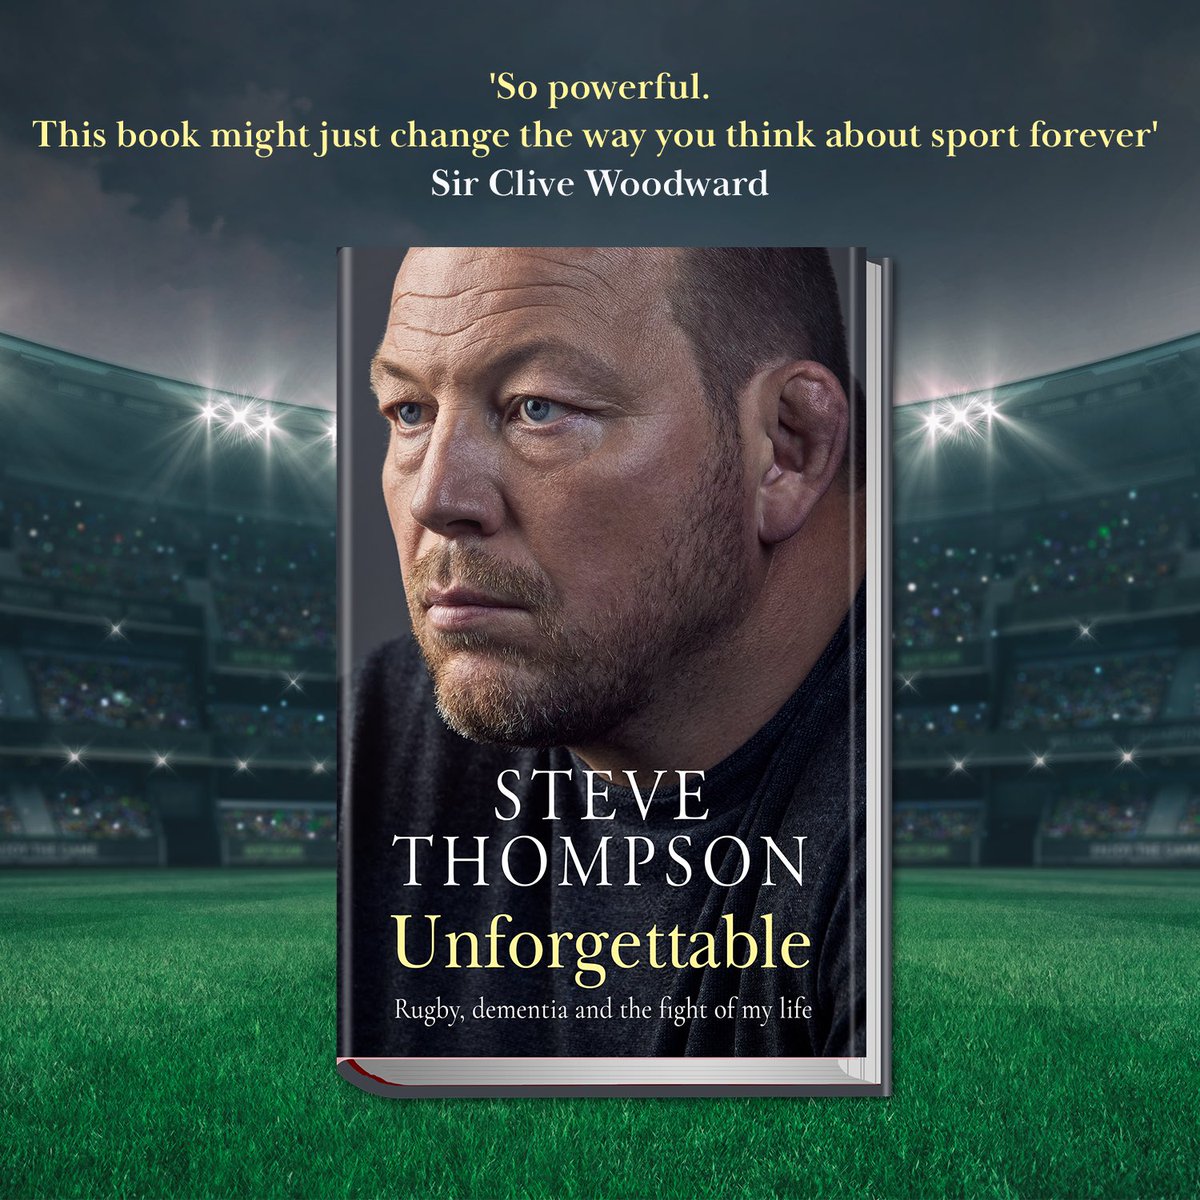 Today my book, Unforgettable goes on sale. Thank you to those that have contributed, to @watsonlittle, @allthingsmgmt and @bonnierbooks_uk for believing in me and @jwoody67, I couldn’t have done this without you. You can buy your copy here: waterstones.com/book/unforgett…